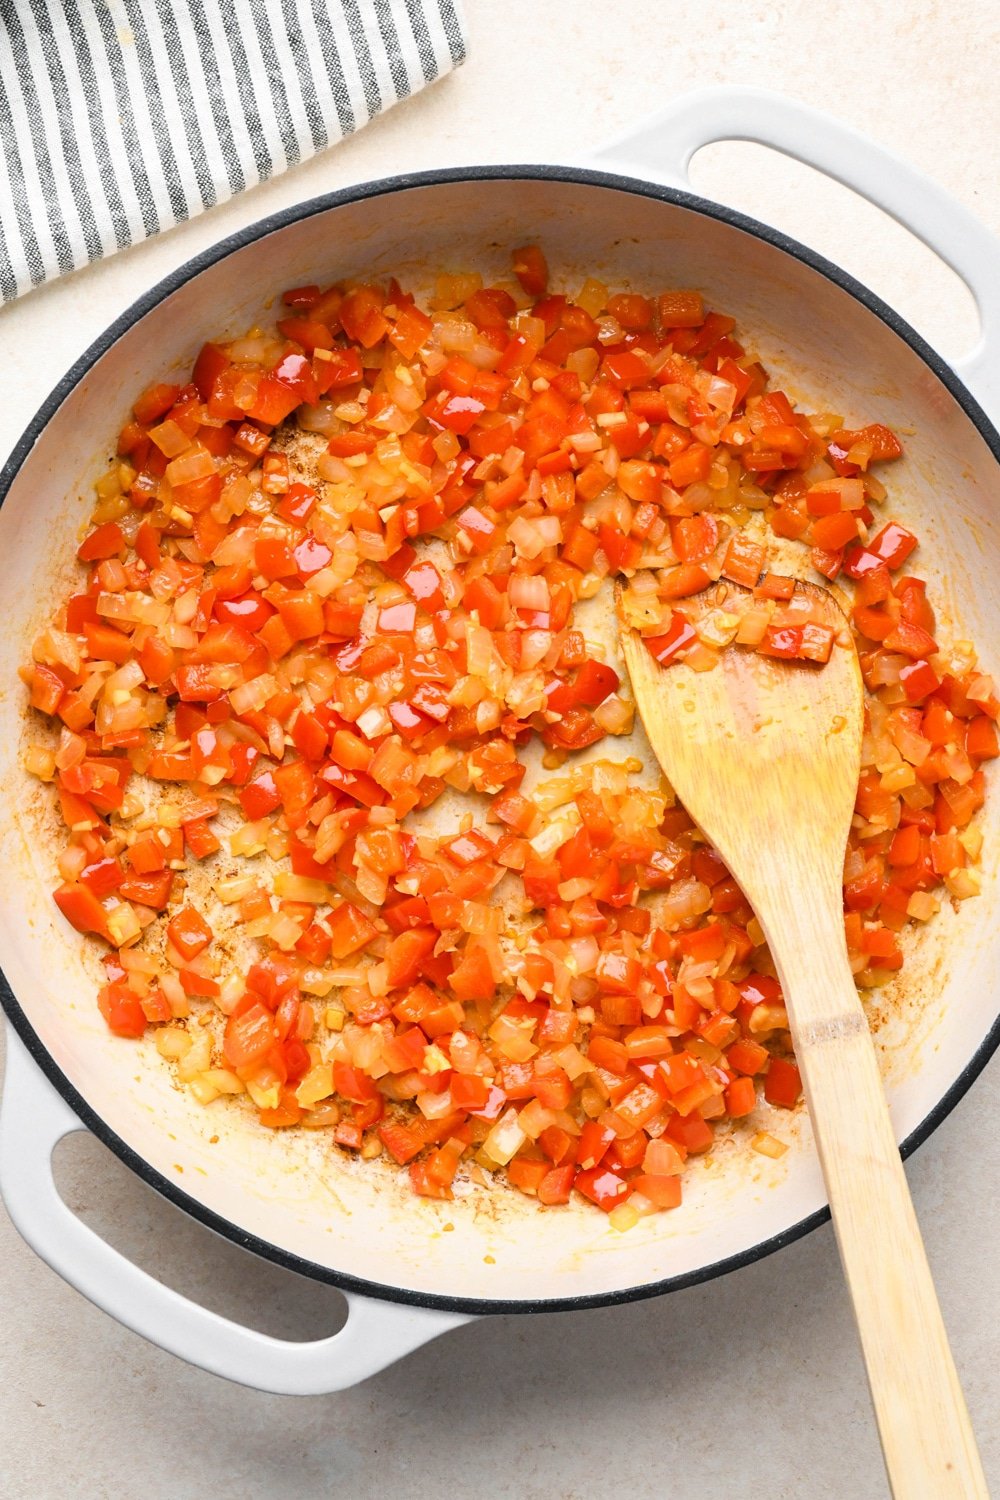 How to make curry chicken and rice: Raw diced red bell pepper, onions, and chopped garlic in a skillet with olive oil after sautéing to caramelize. 